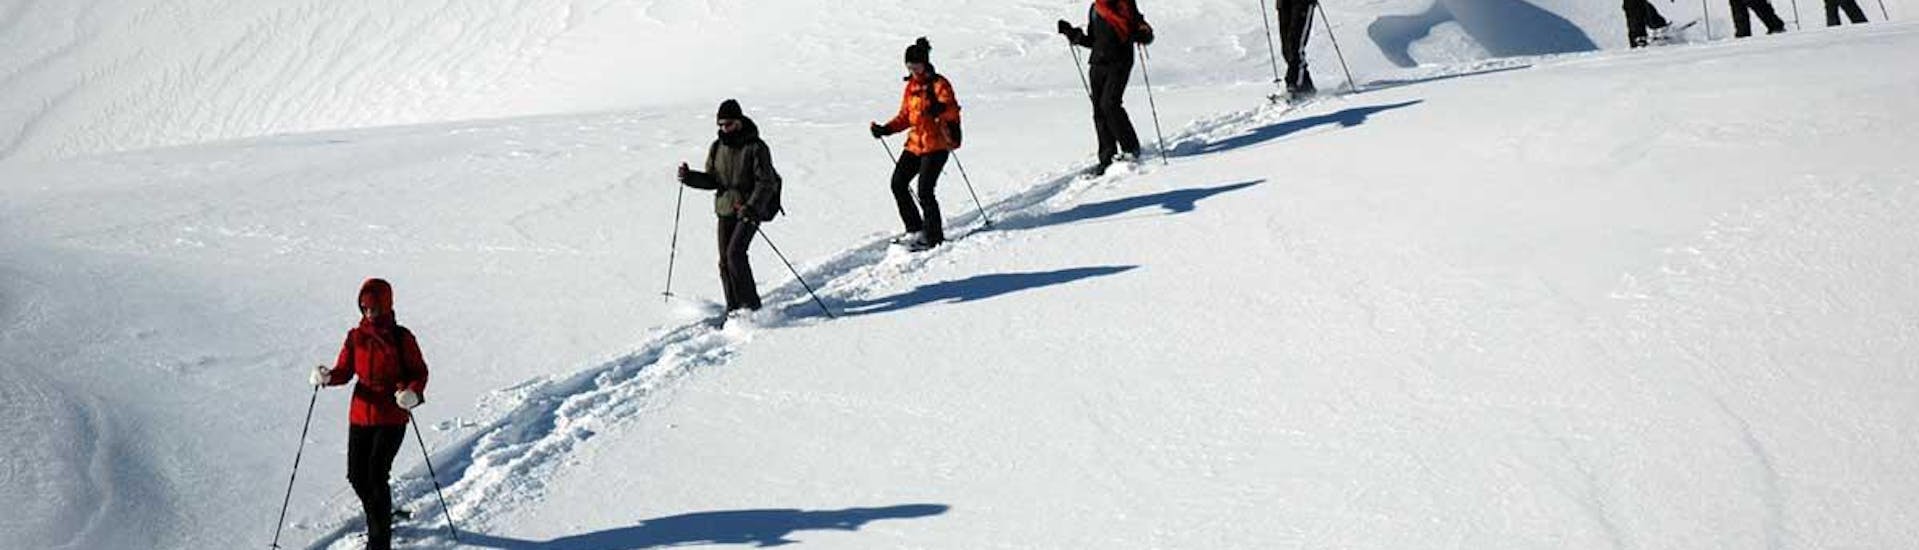 The participants of the private snowshoeing tour of Skischule Obertraun have a lot of fun exploring the region in Dachstein Krippenstein.